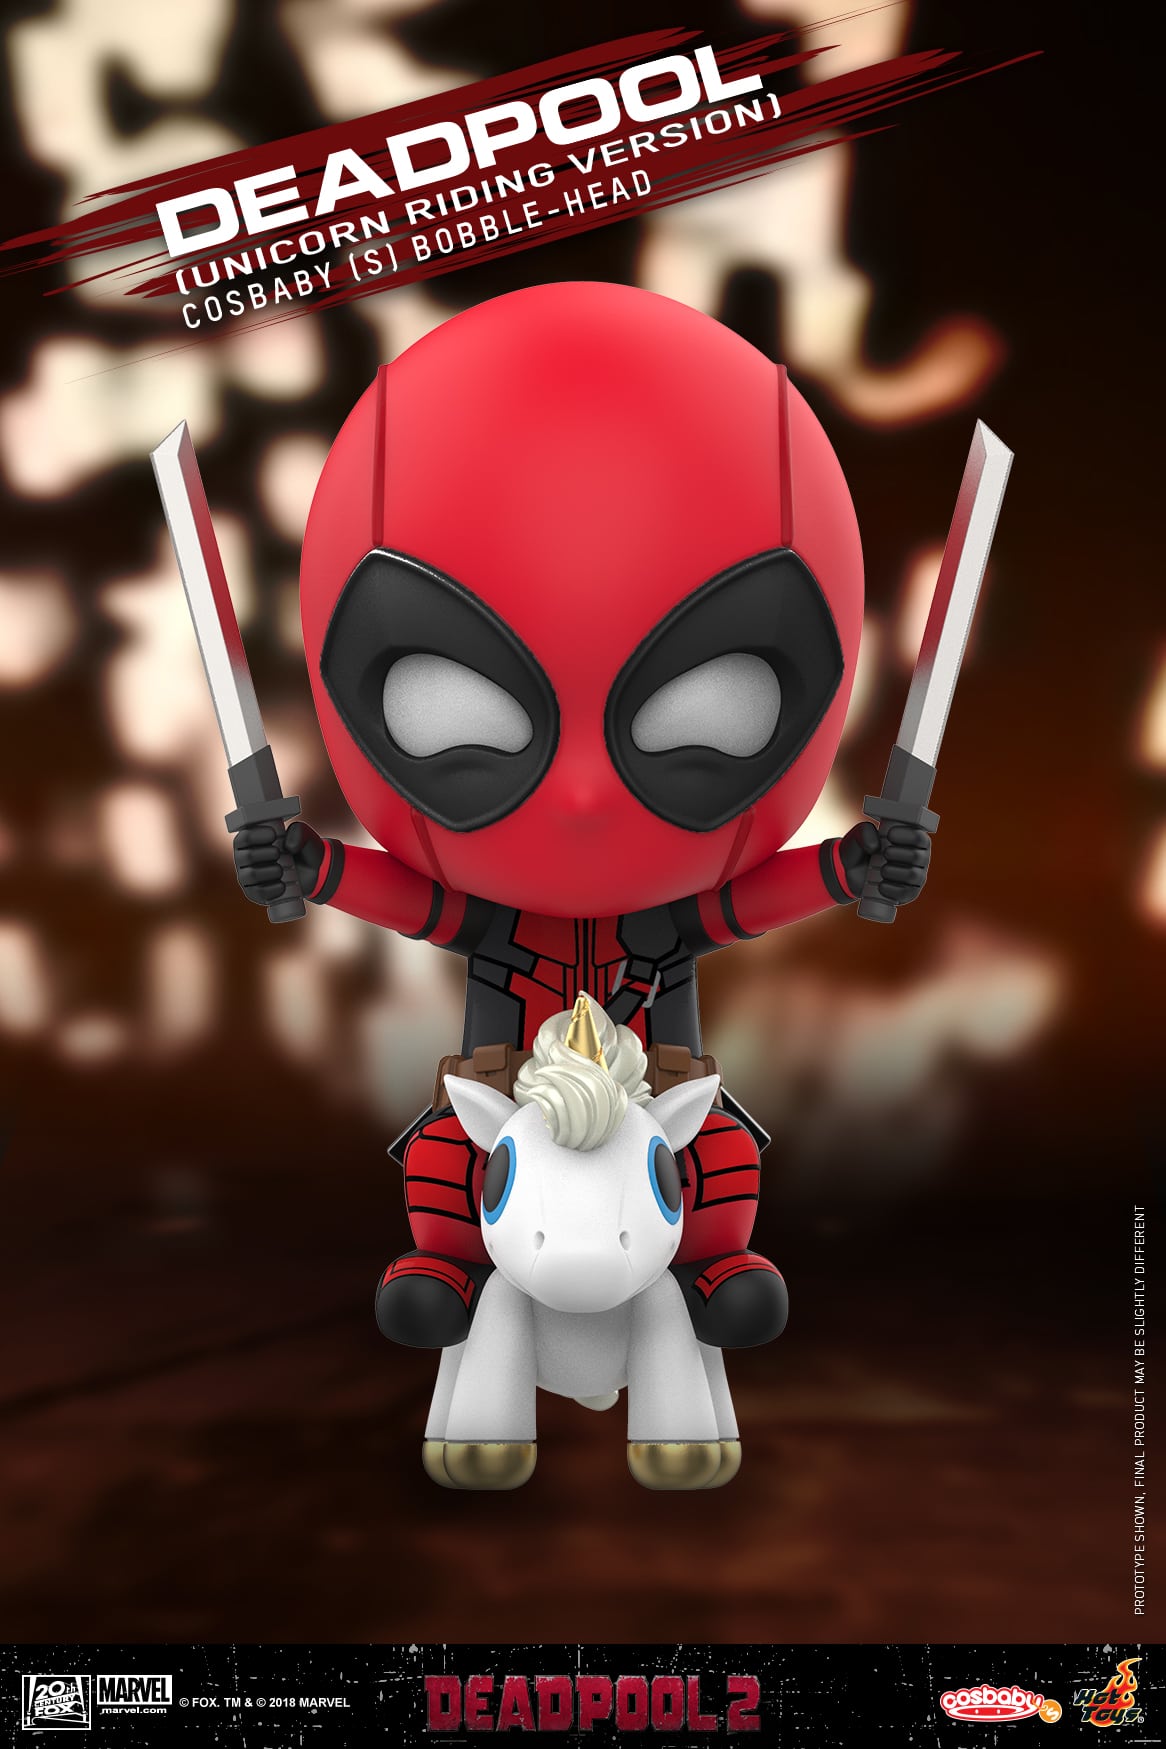 Hot Toys unveils a new wave of Deadpool Cosbaby Bobble-heads